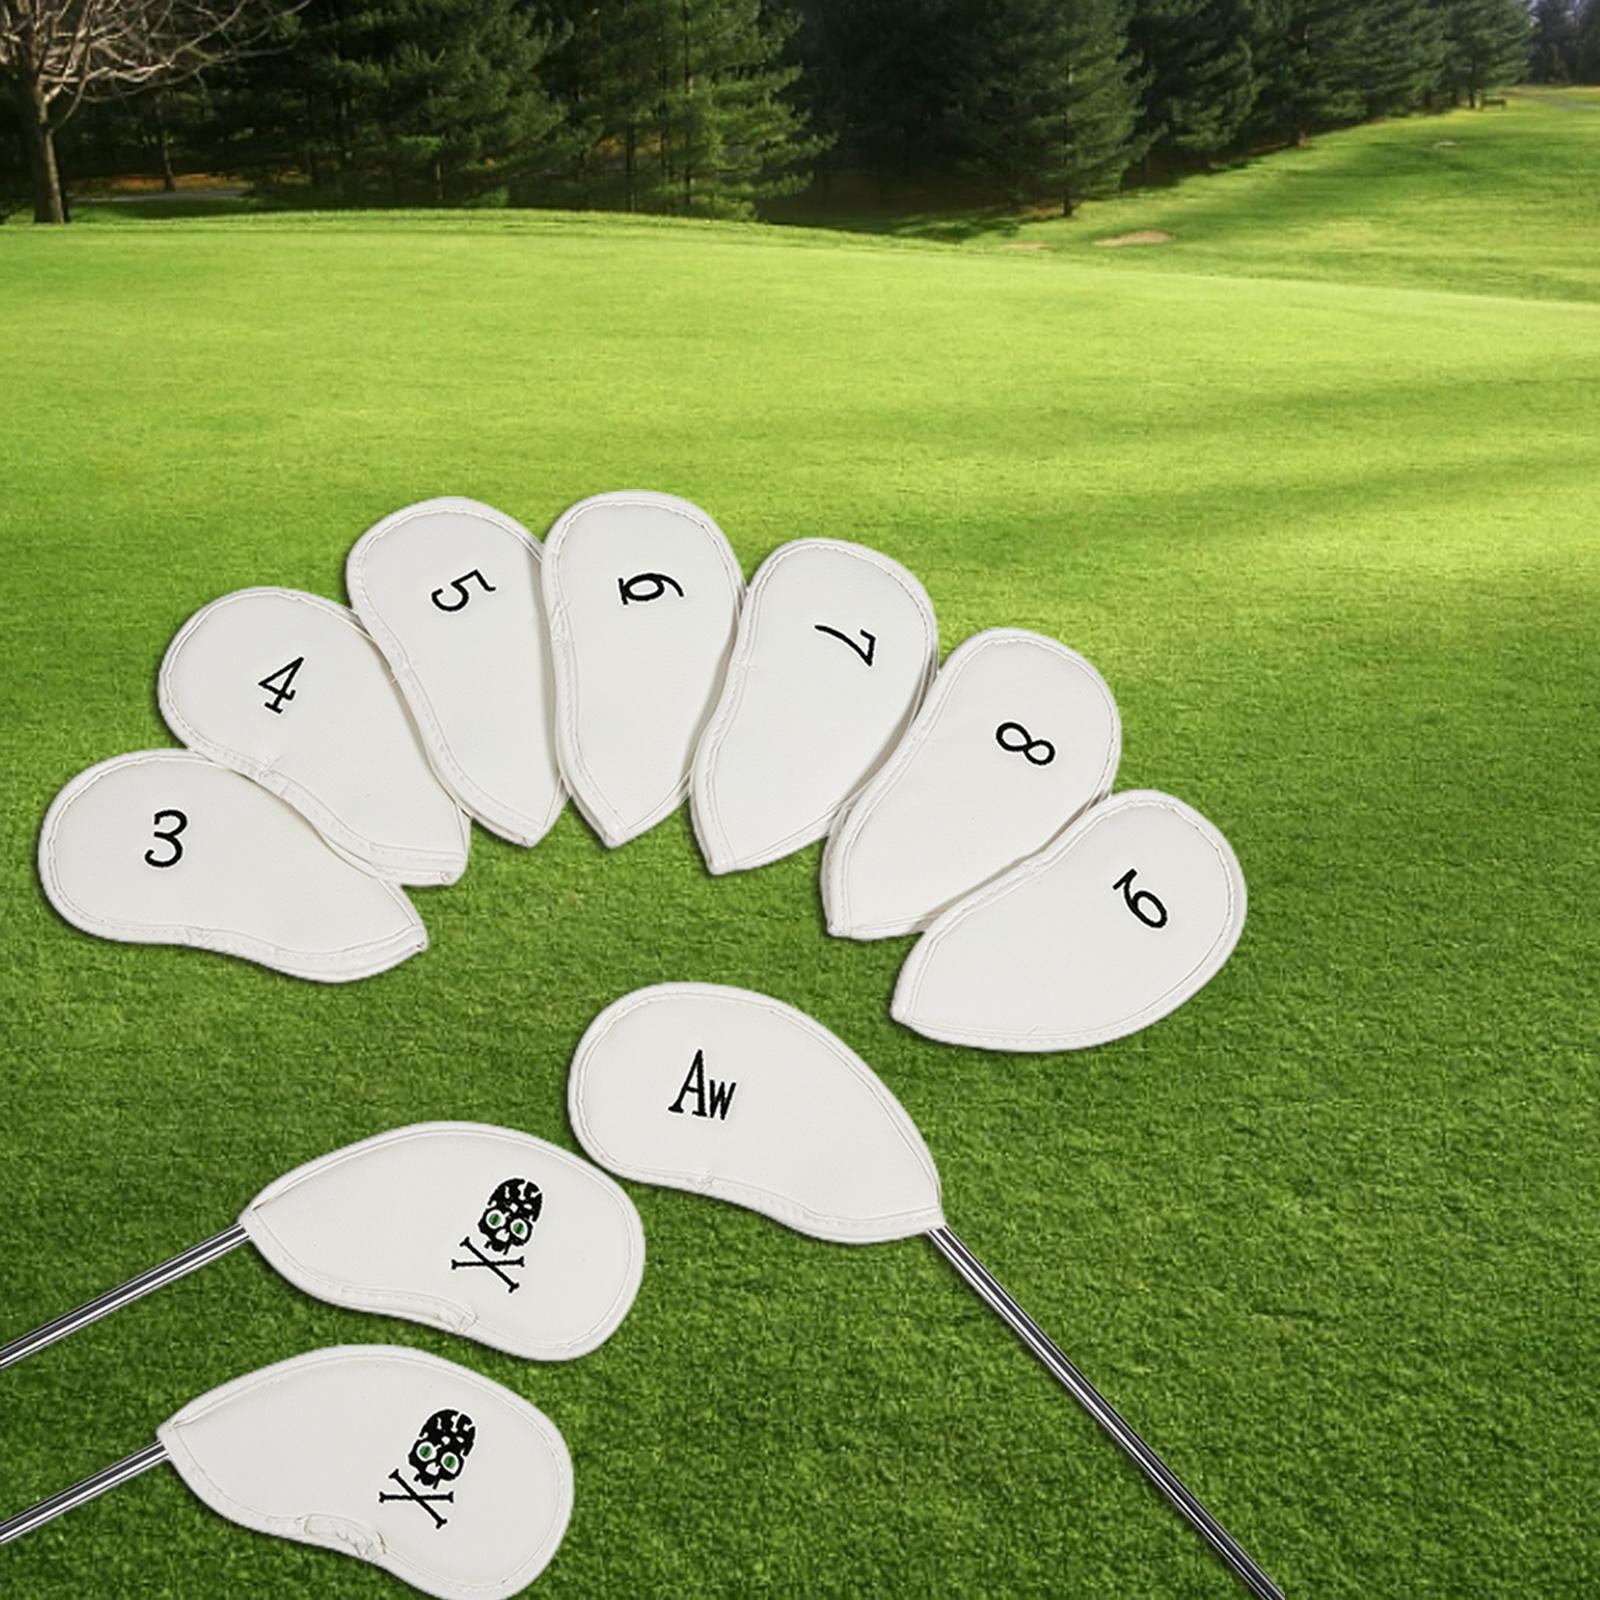 10 Pieces Golf Club Covers Golf Club Protectors Travel Golf Iron Head Covers